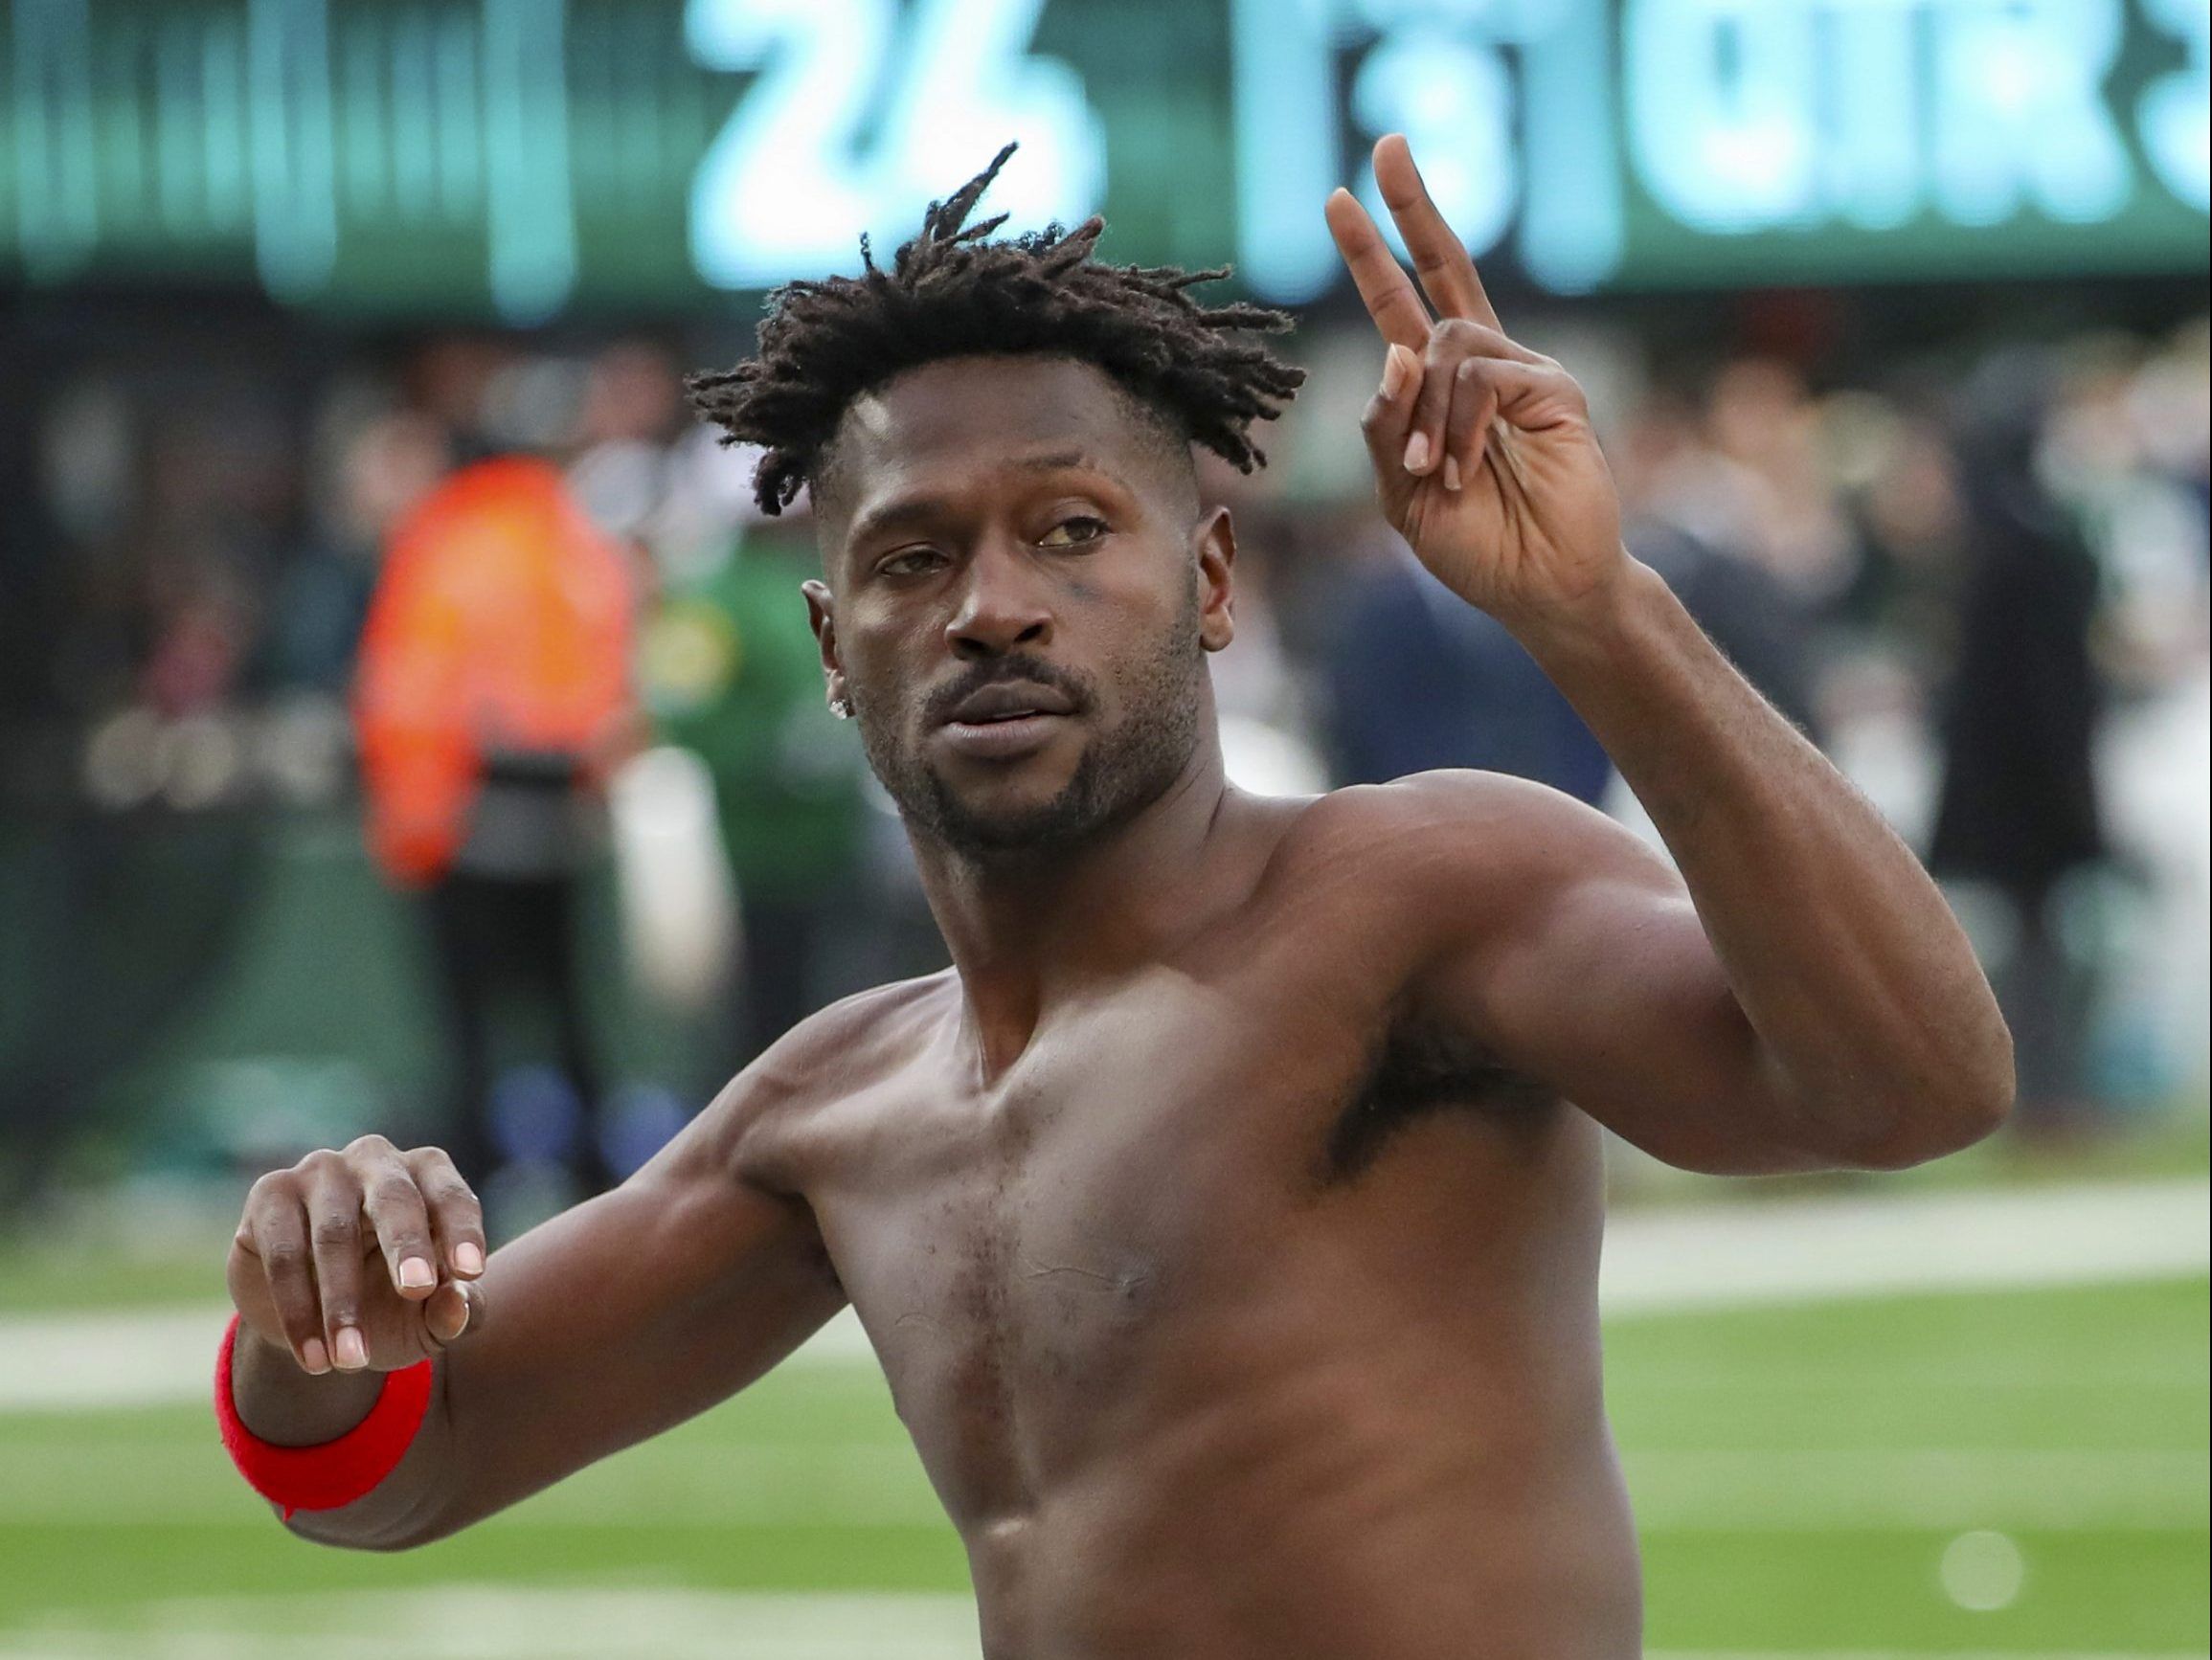 ANTONIO BROWN ON FLASHING: 'Disinformation about me is crazy